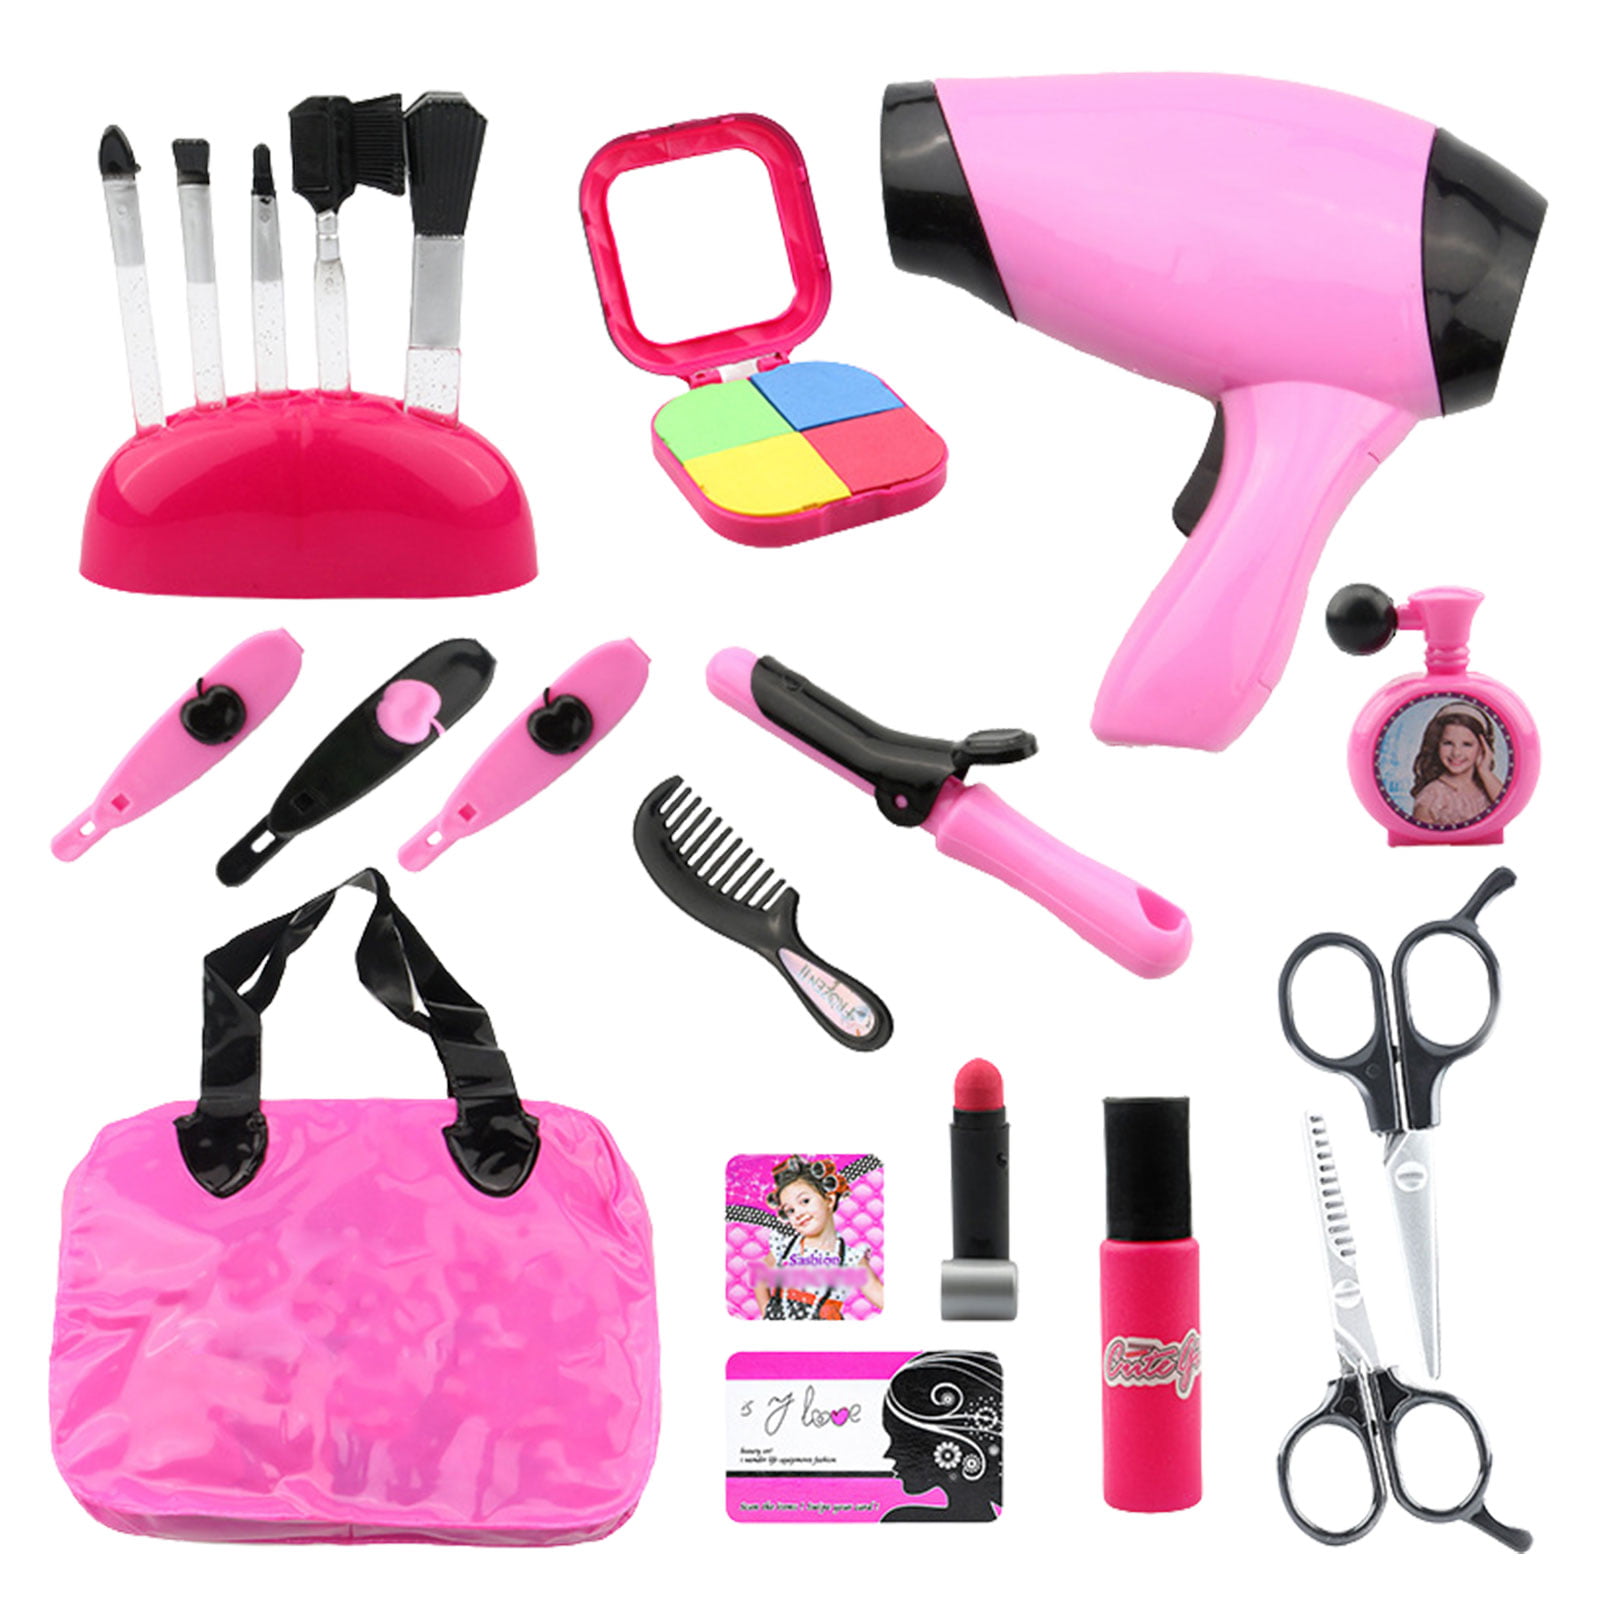 Beauty Hair Stylist Set, Beauty Salon Fashion Pretend Play Set for Girls  with Toy Blow Dryer, Curler and Other Styling Tools 